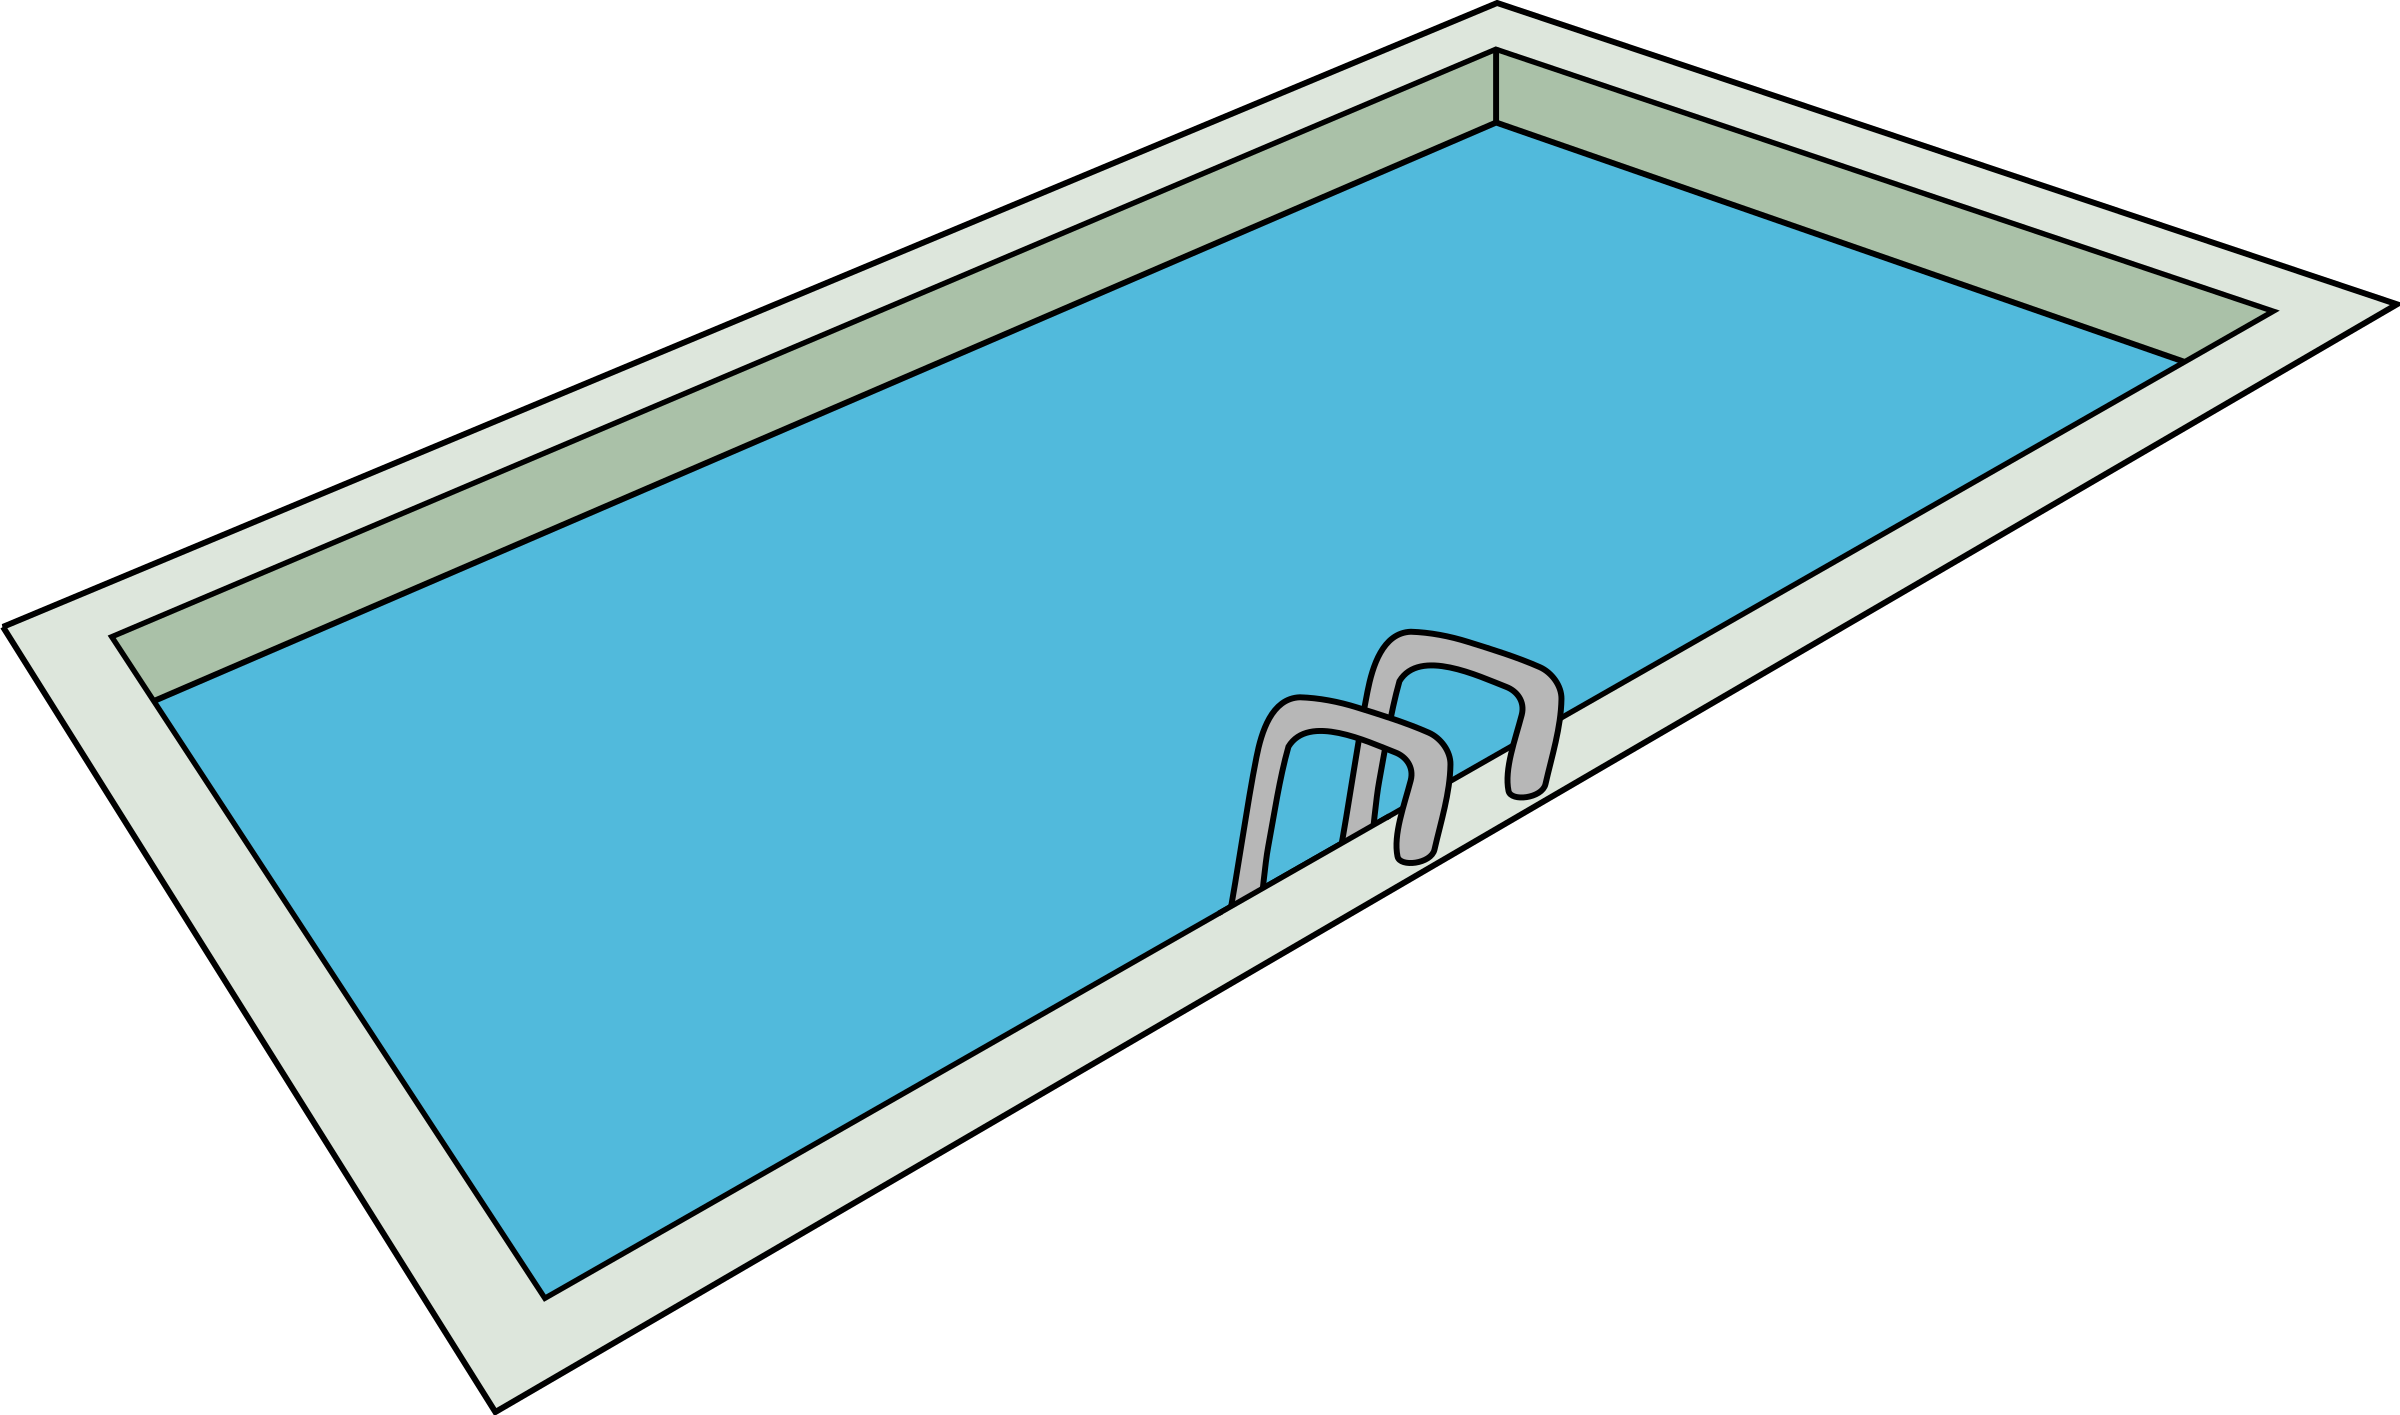 free clipart images swimming pool - photo #4